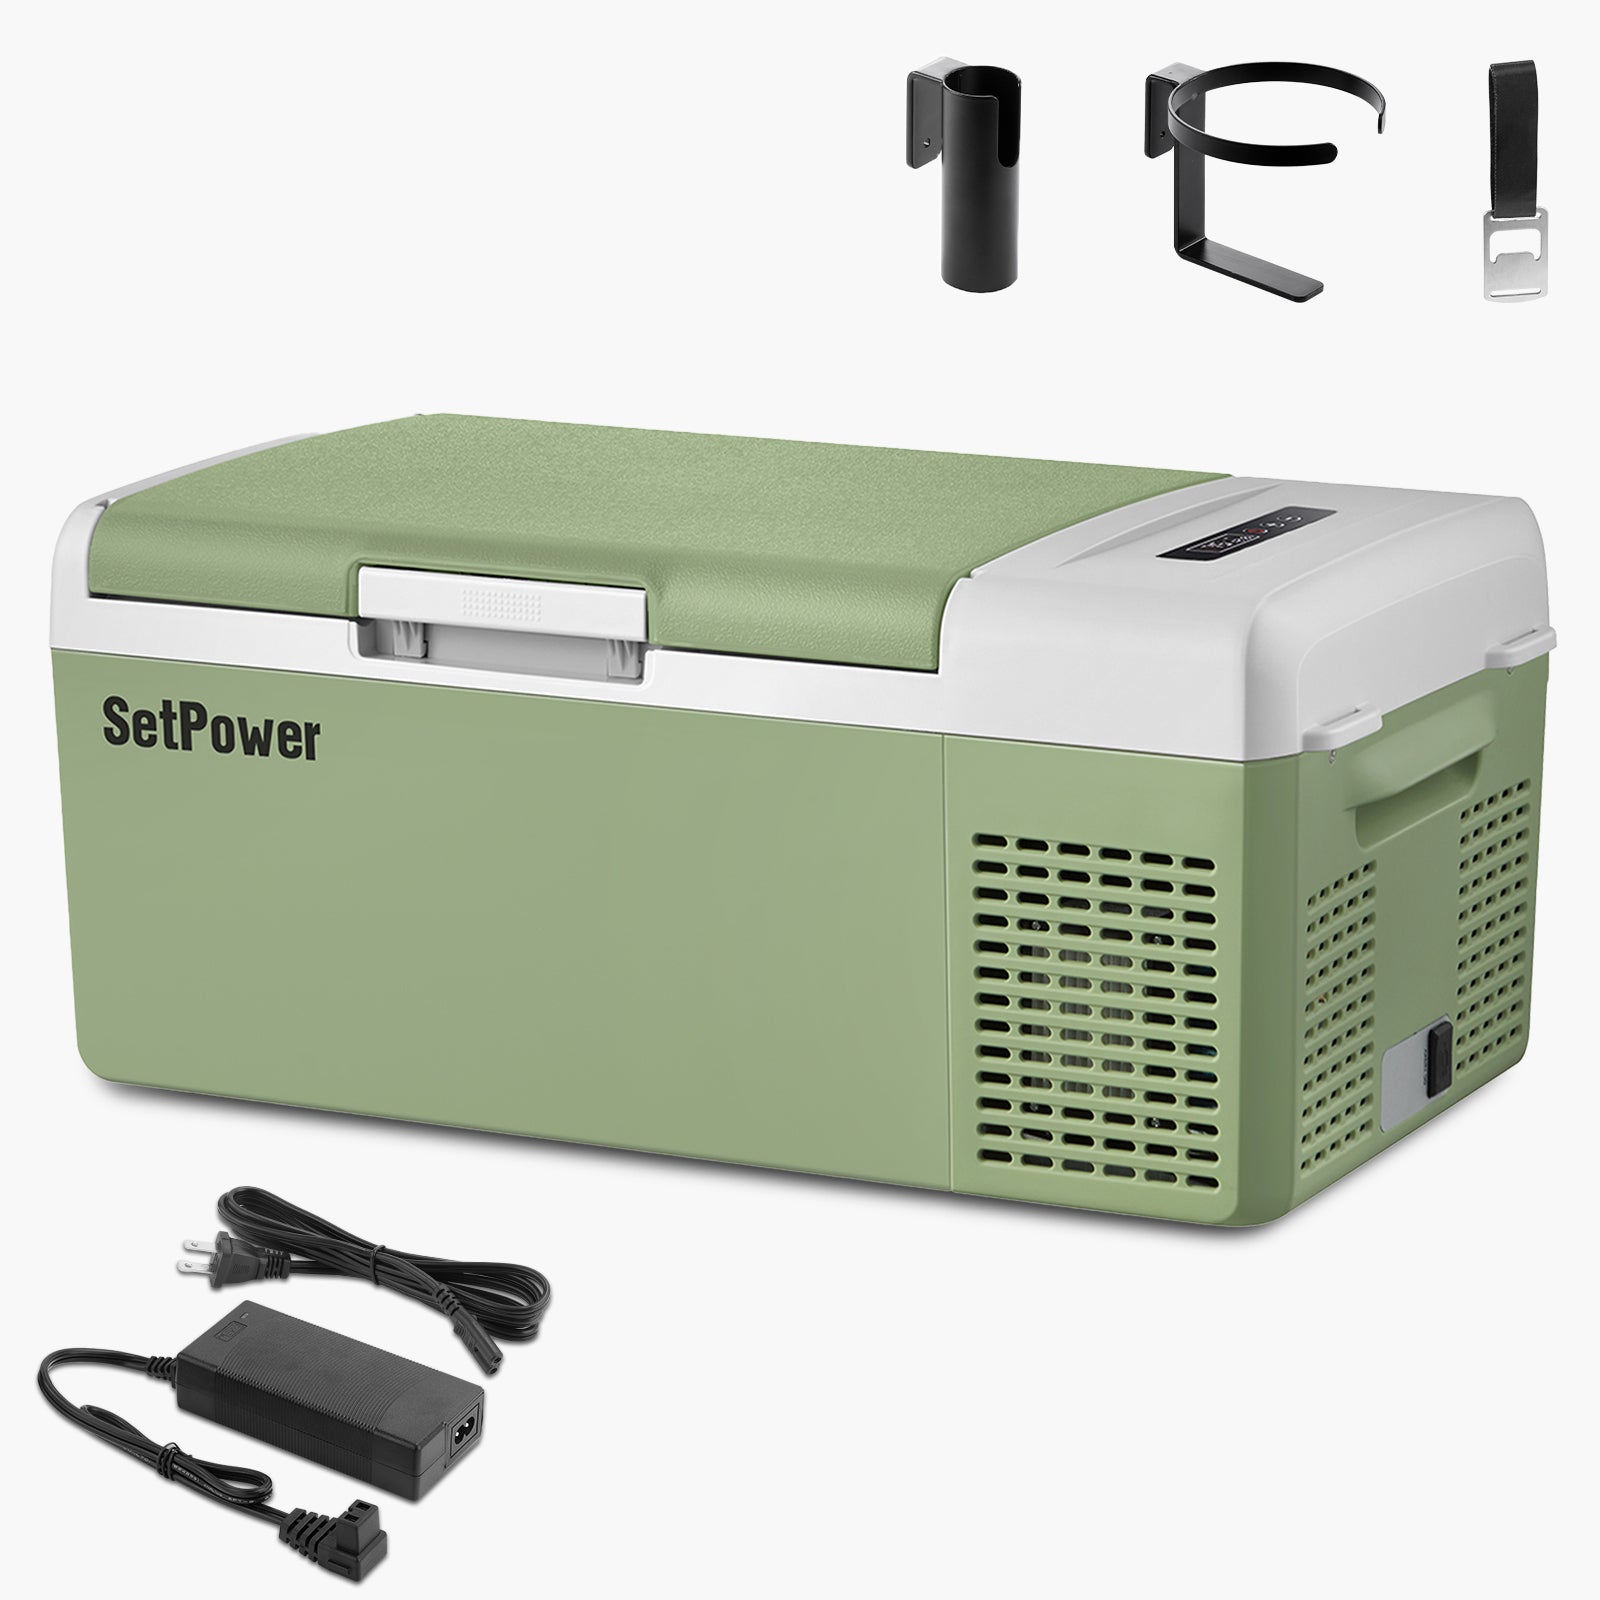 Setpower 15.8/21Qt FC15 Portable 12V Car Refrigerator With 3 Free Gifts